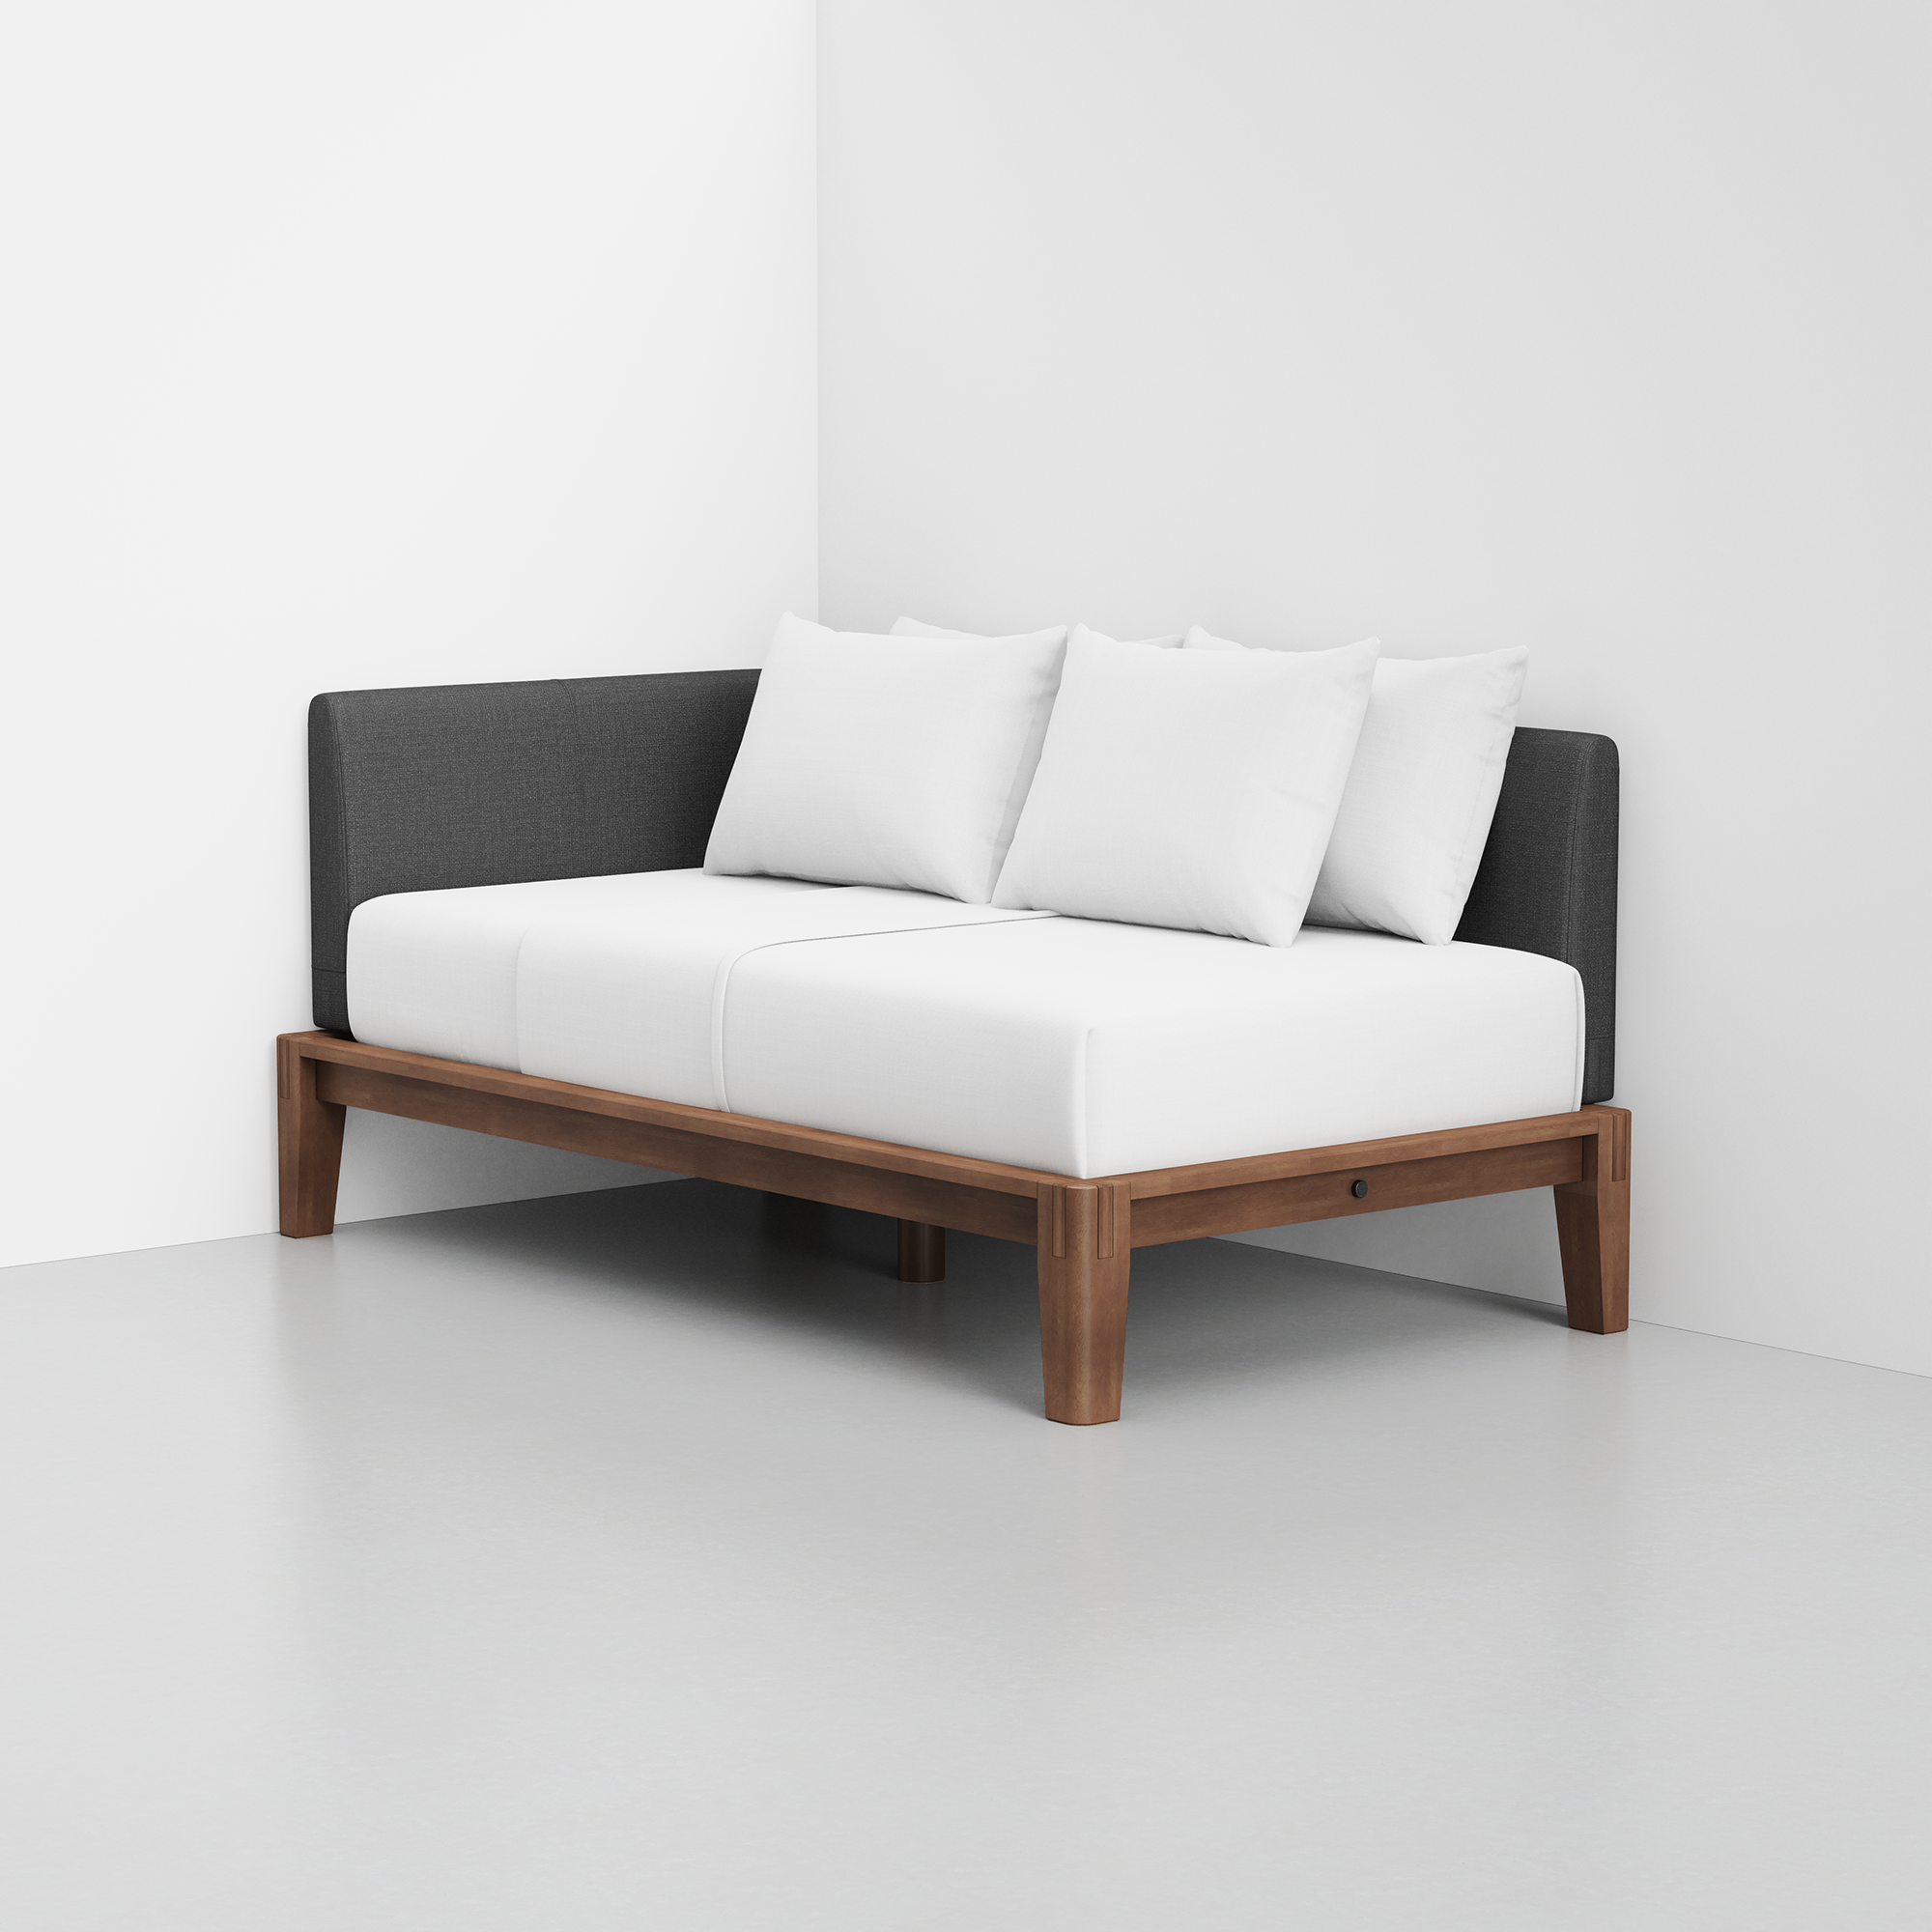 PDP Image: The Daybed (Walnut / Dark Charcoal) - Rendering - Pillows Stacked